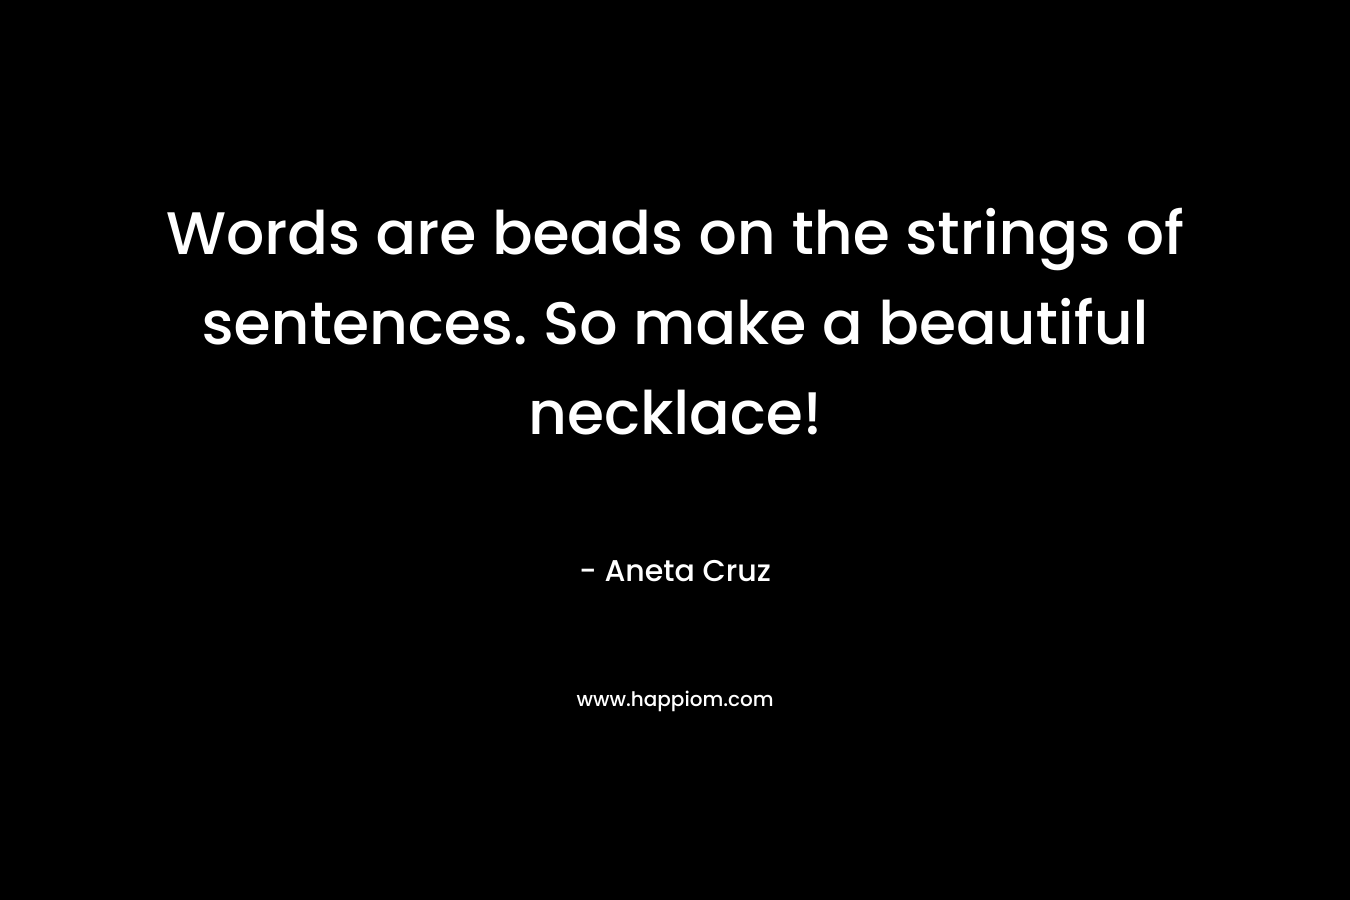 Words are beads on the strings of sentences. So make a beautiful necklace!